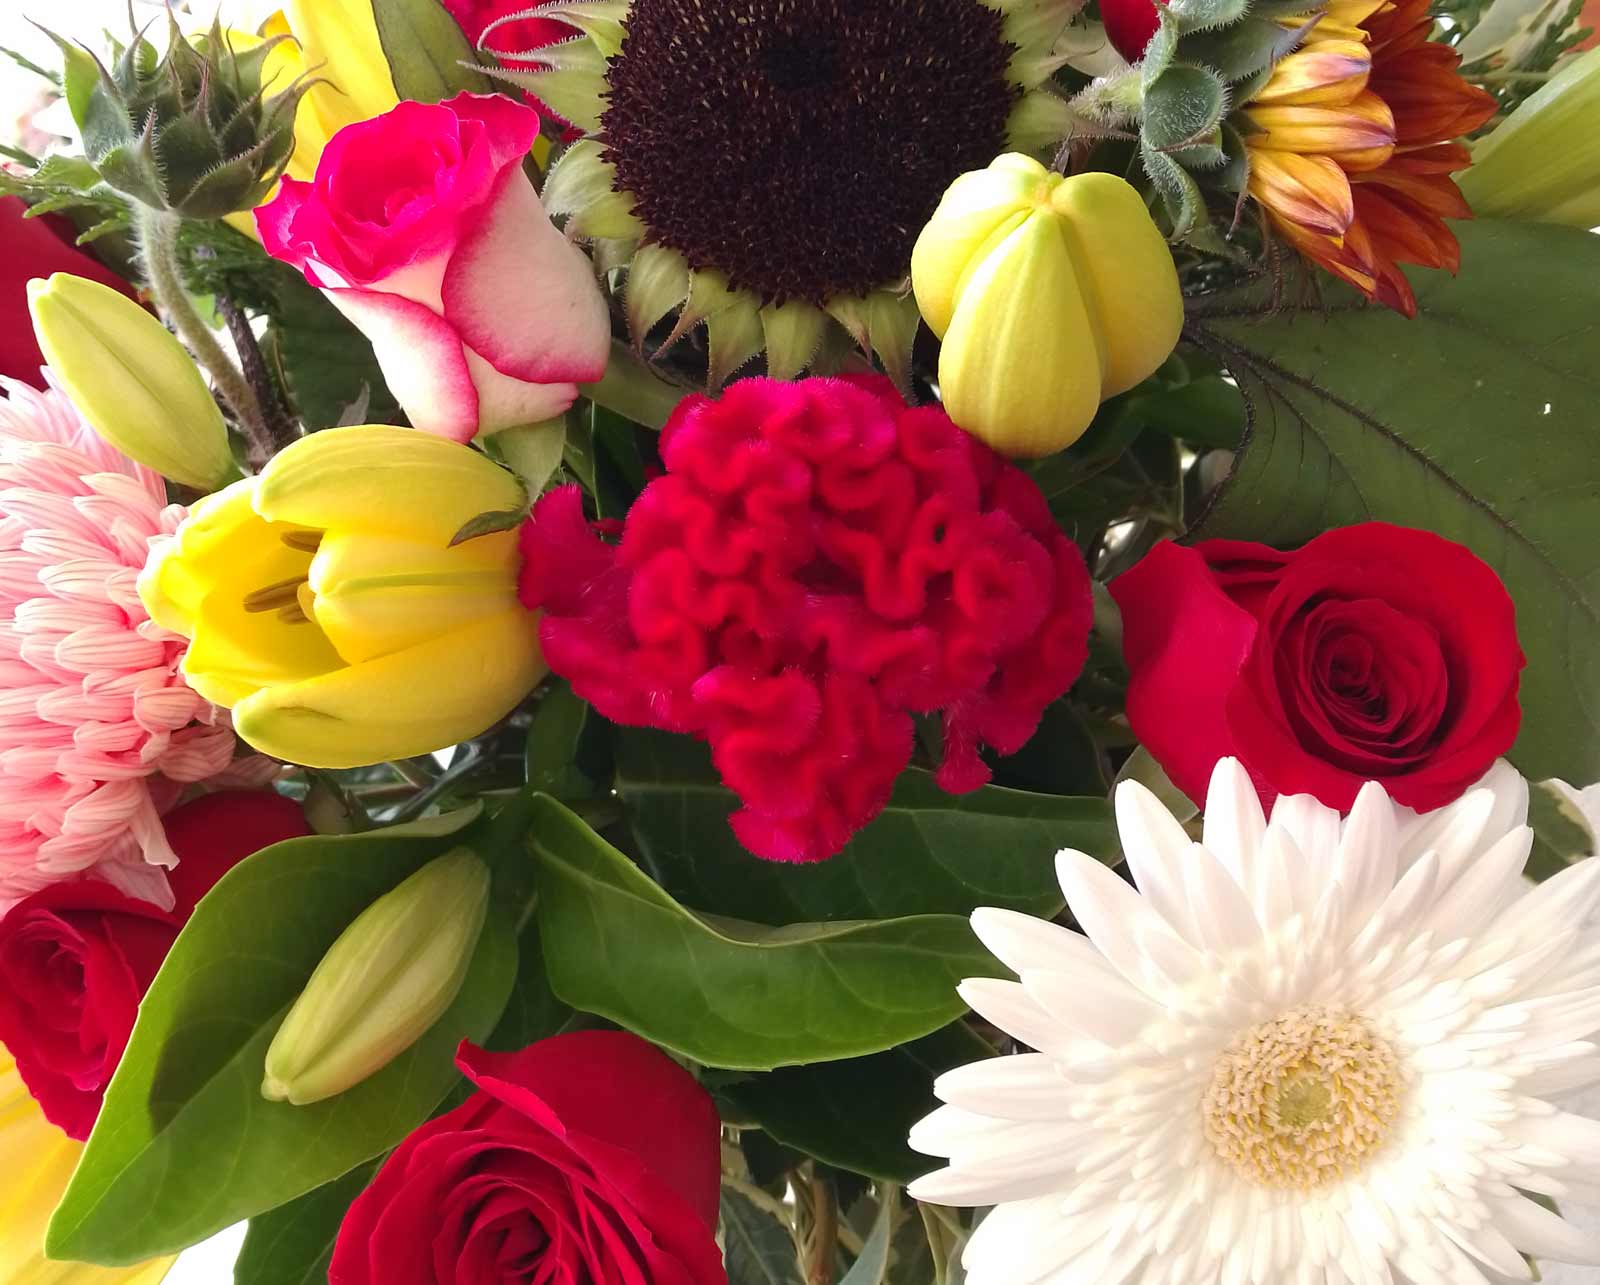  Mothers Day Flower Delivery at PosyBean Flowers Delivered